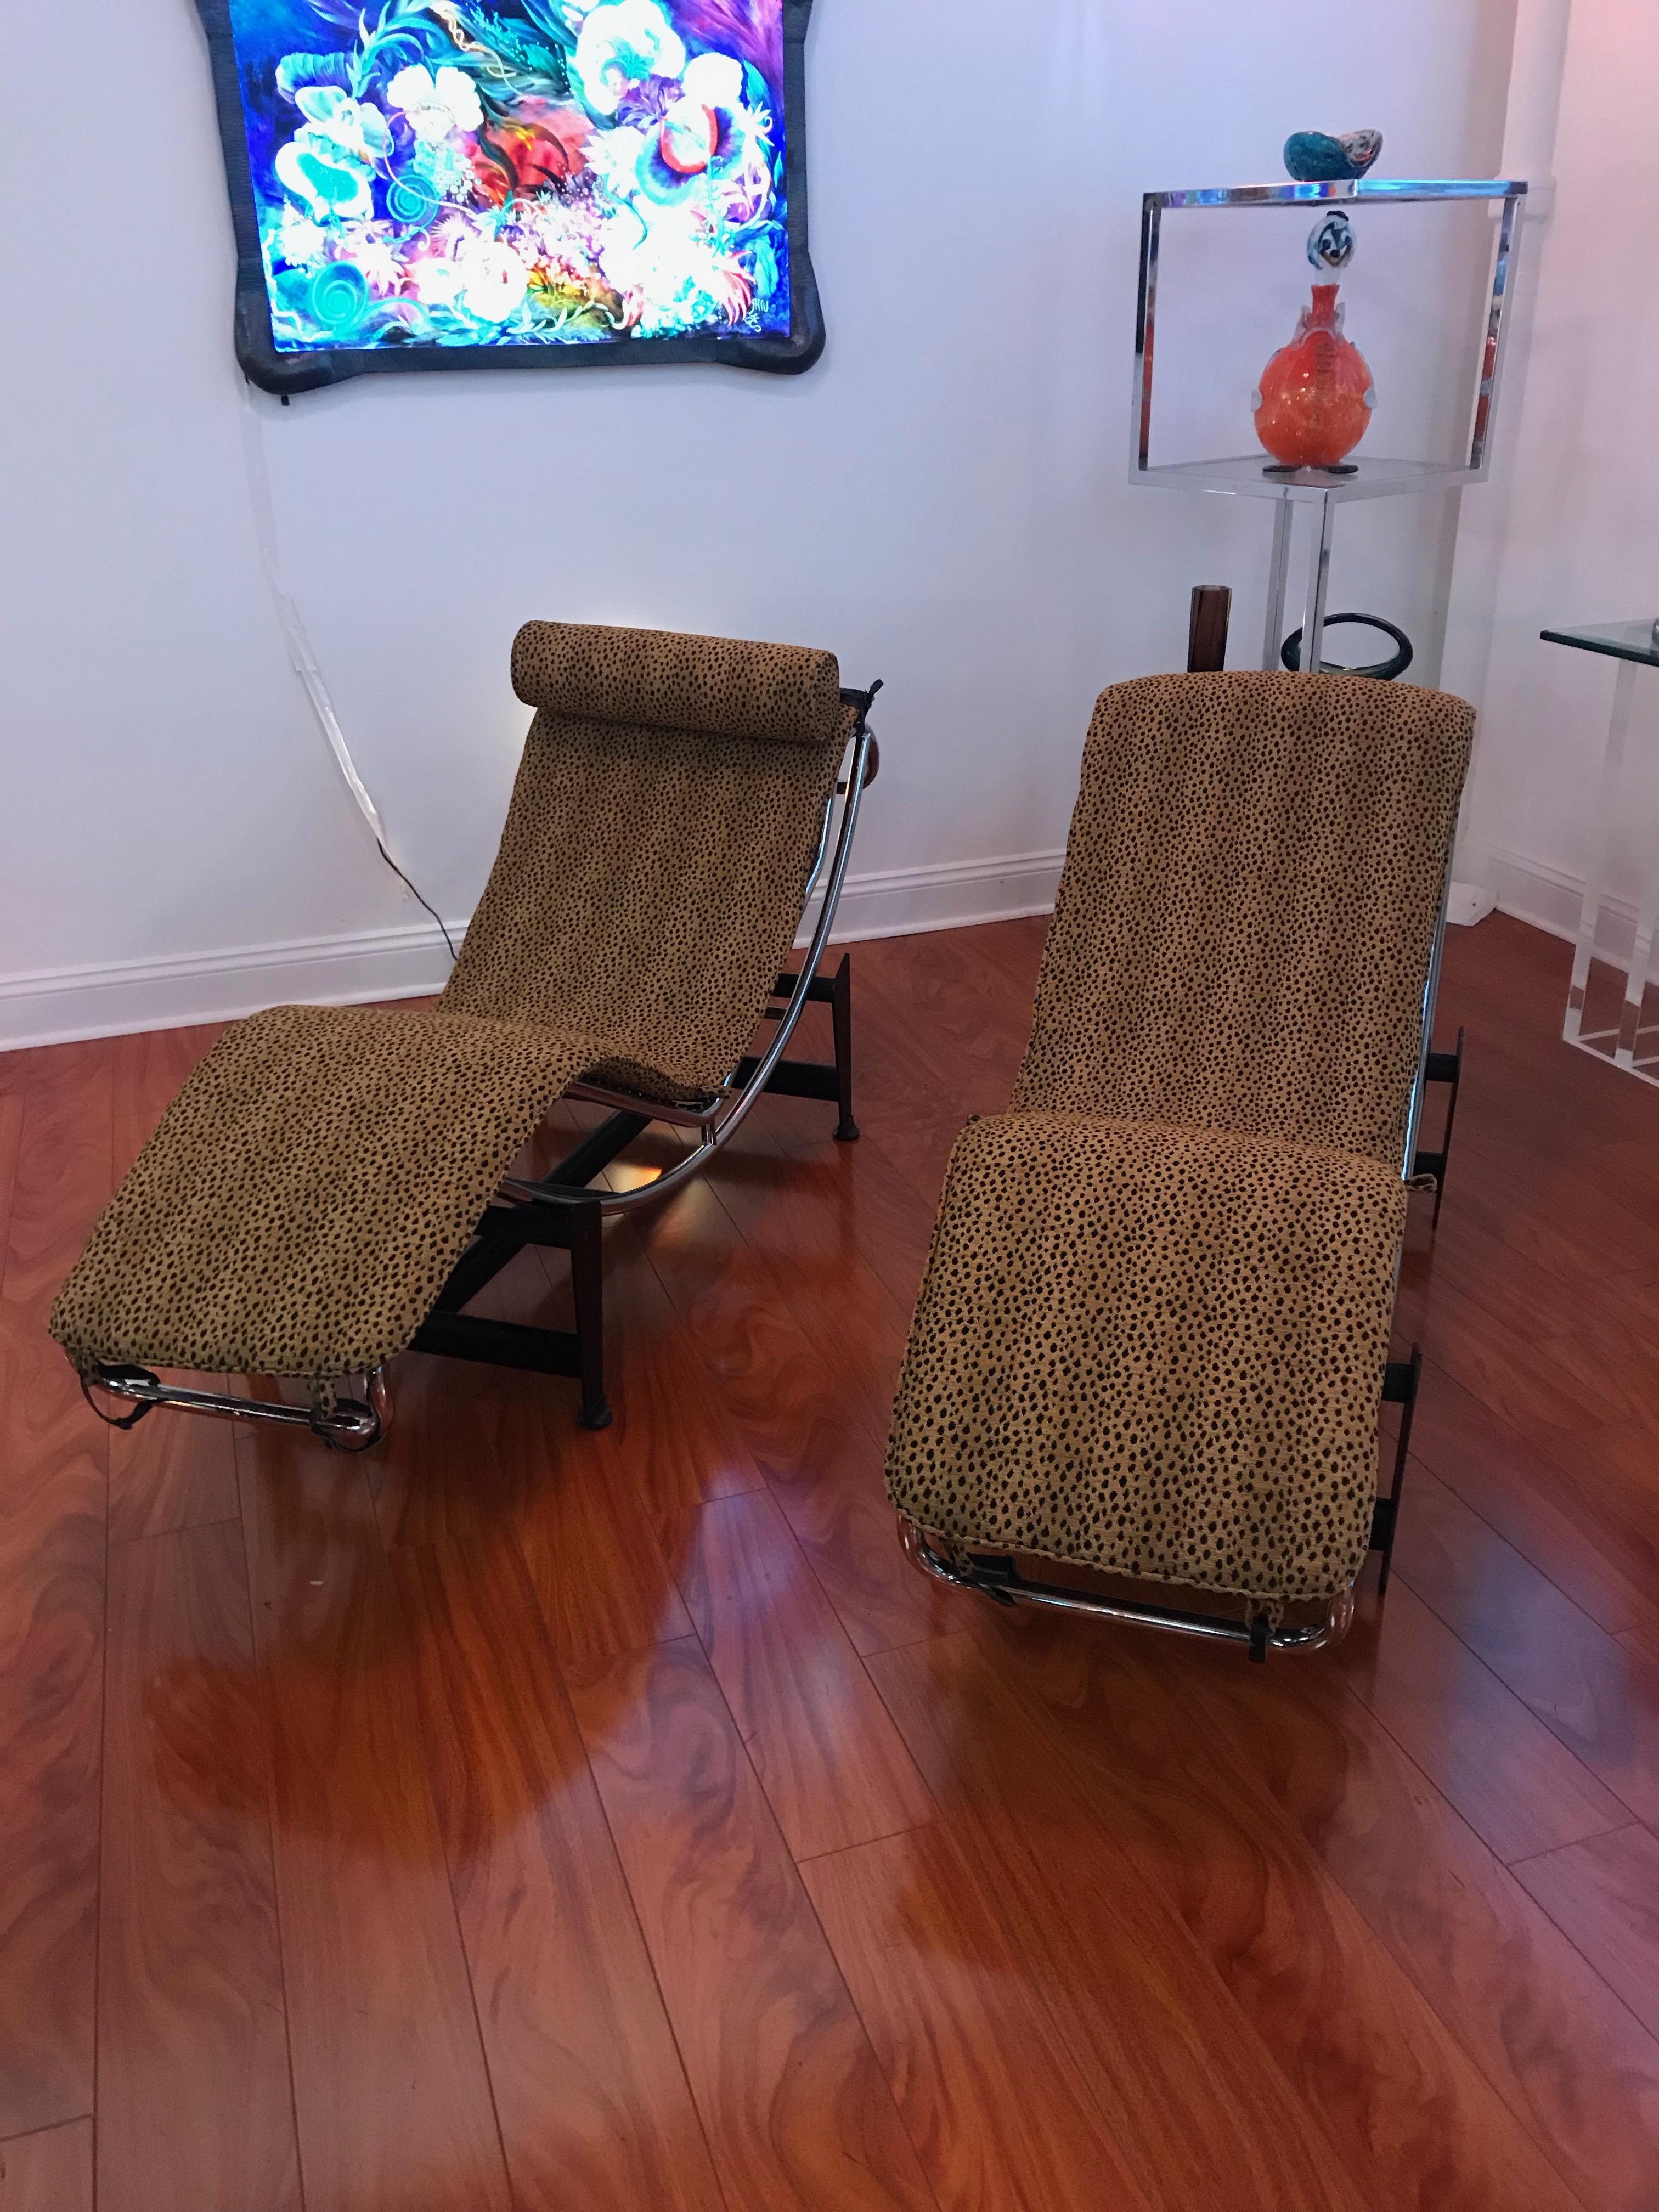 Mid-Century Modern pair of Le Corbusier LC4 style Leopard print and chrome lounge chairs. One of the lounge chairs has a matching leopard pillow. The cushions have been reupholstered in faux leopard print.